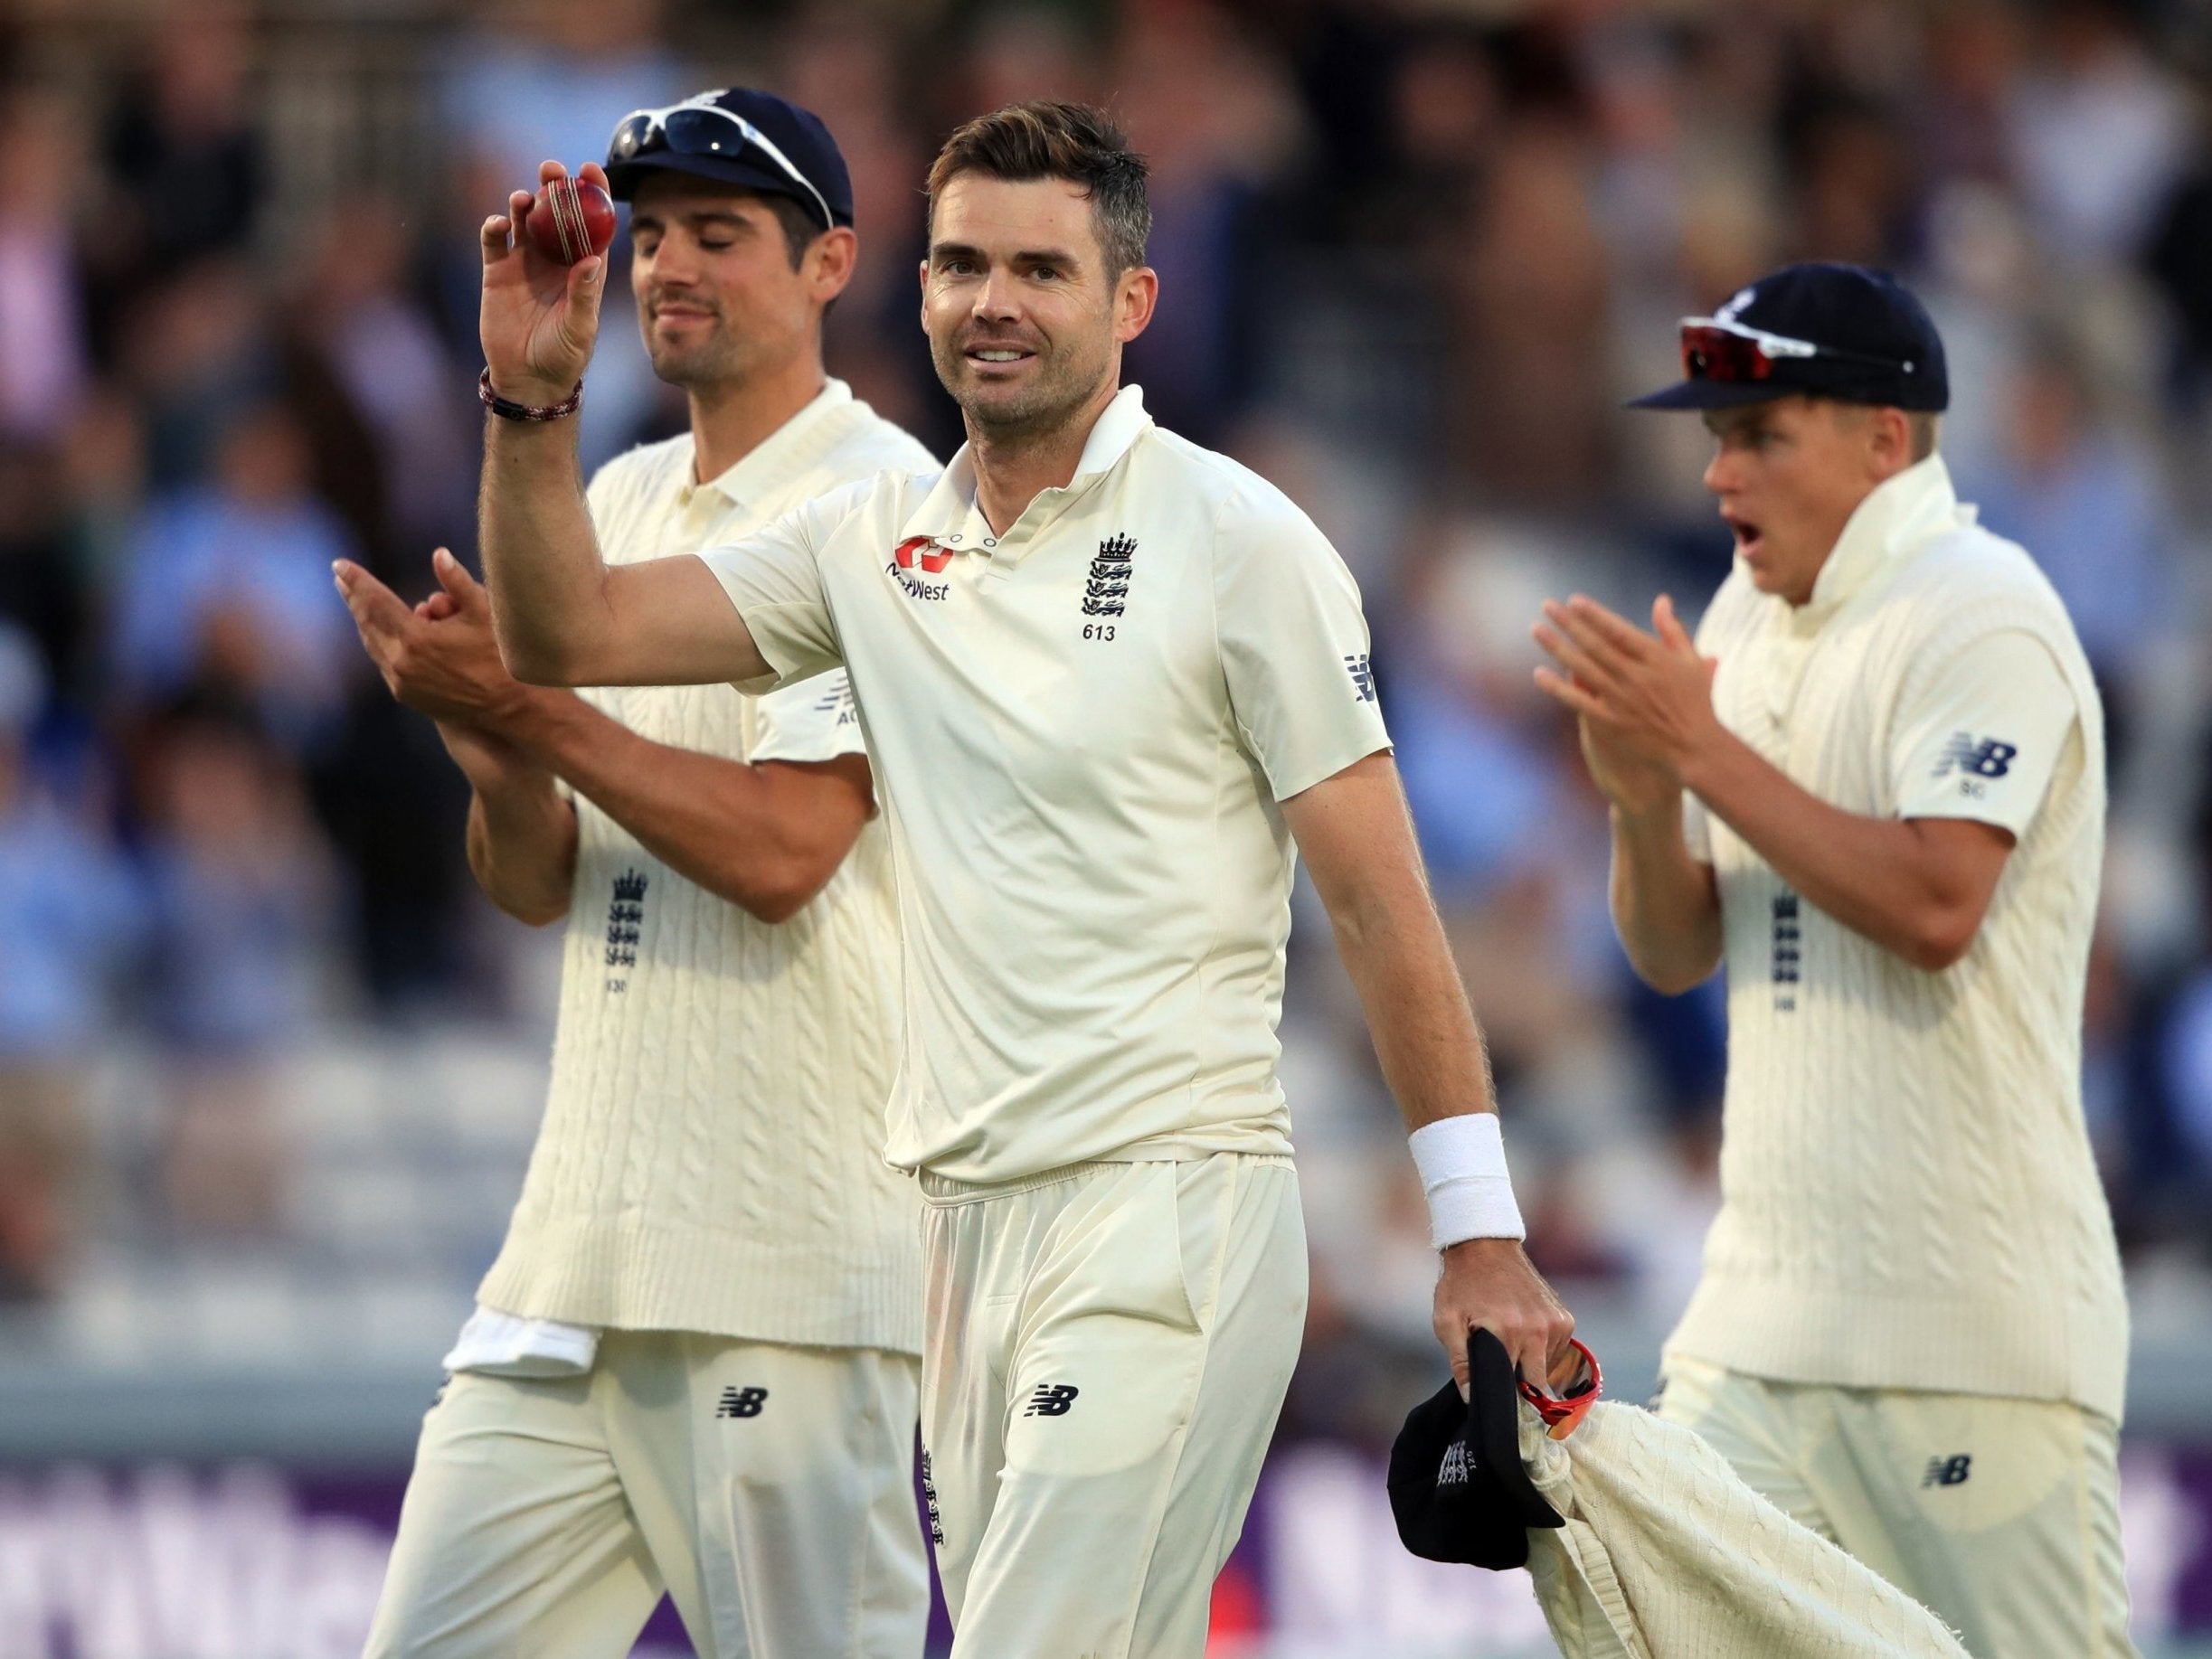 James Anderson salutes the crowd after his five-wicket haul